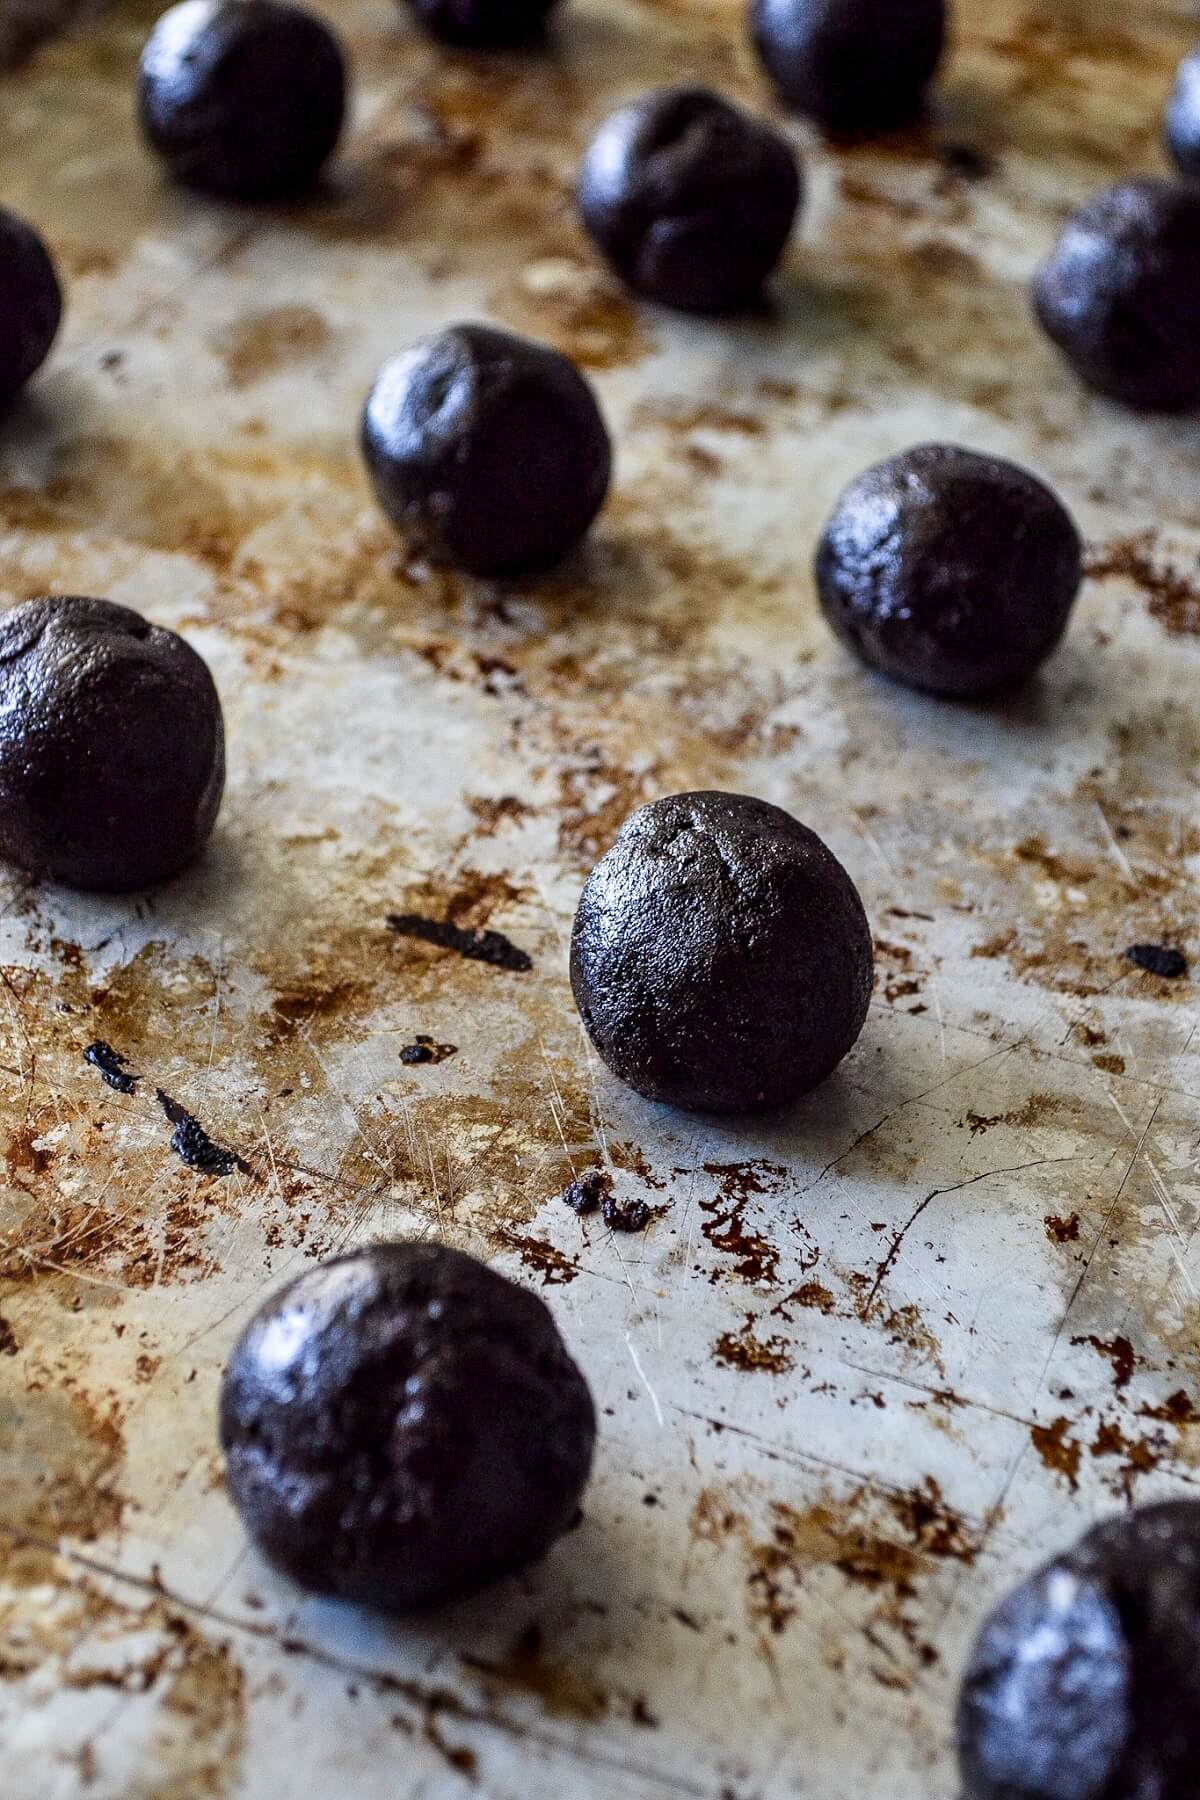 Oreo truffle balls sit on a baking sheet prior to being coated in white chocolate.